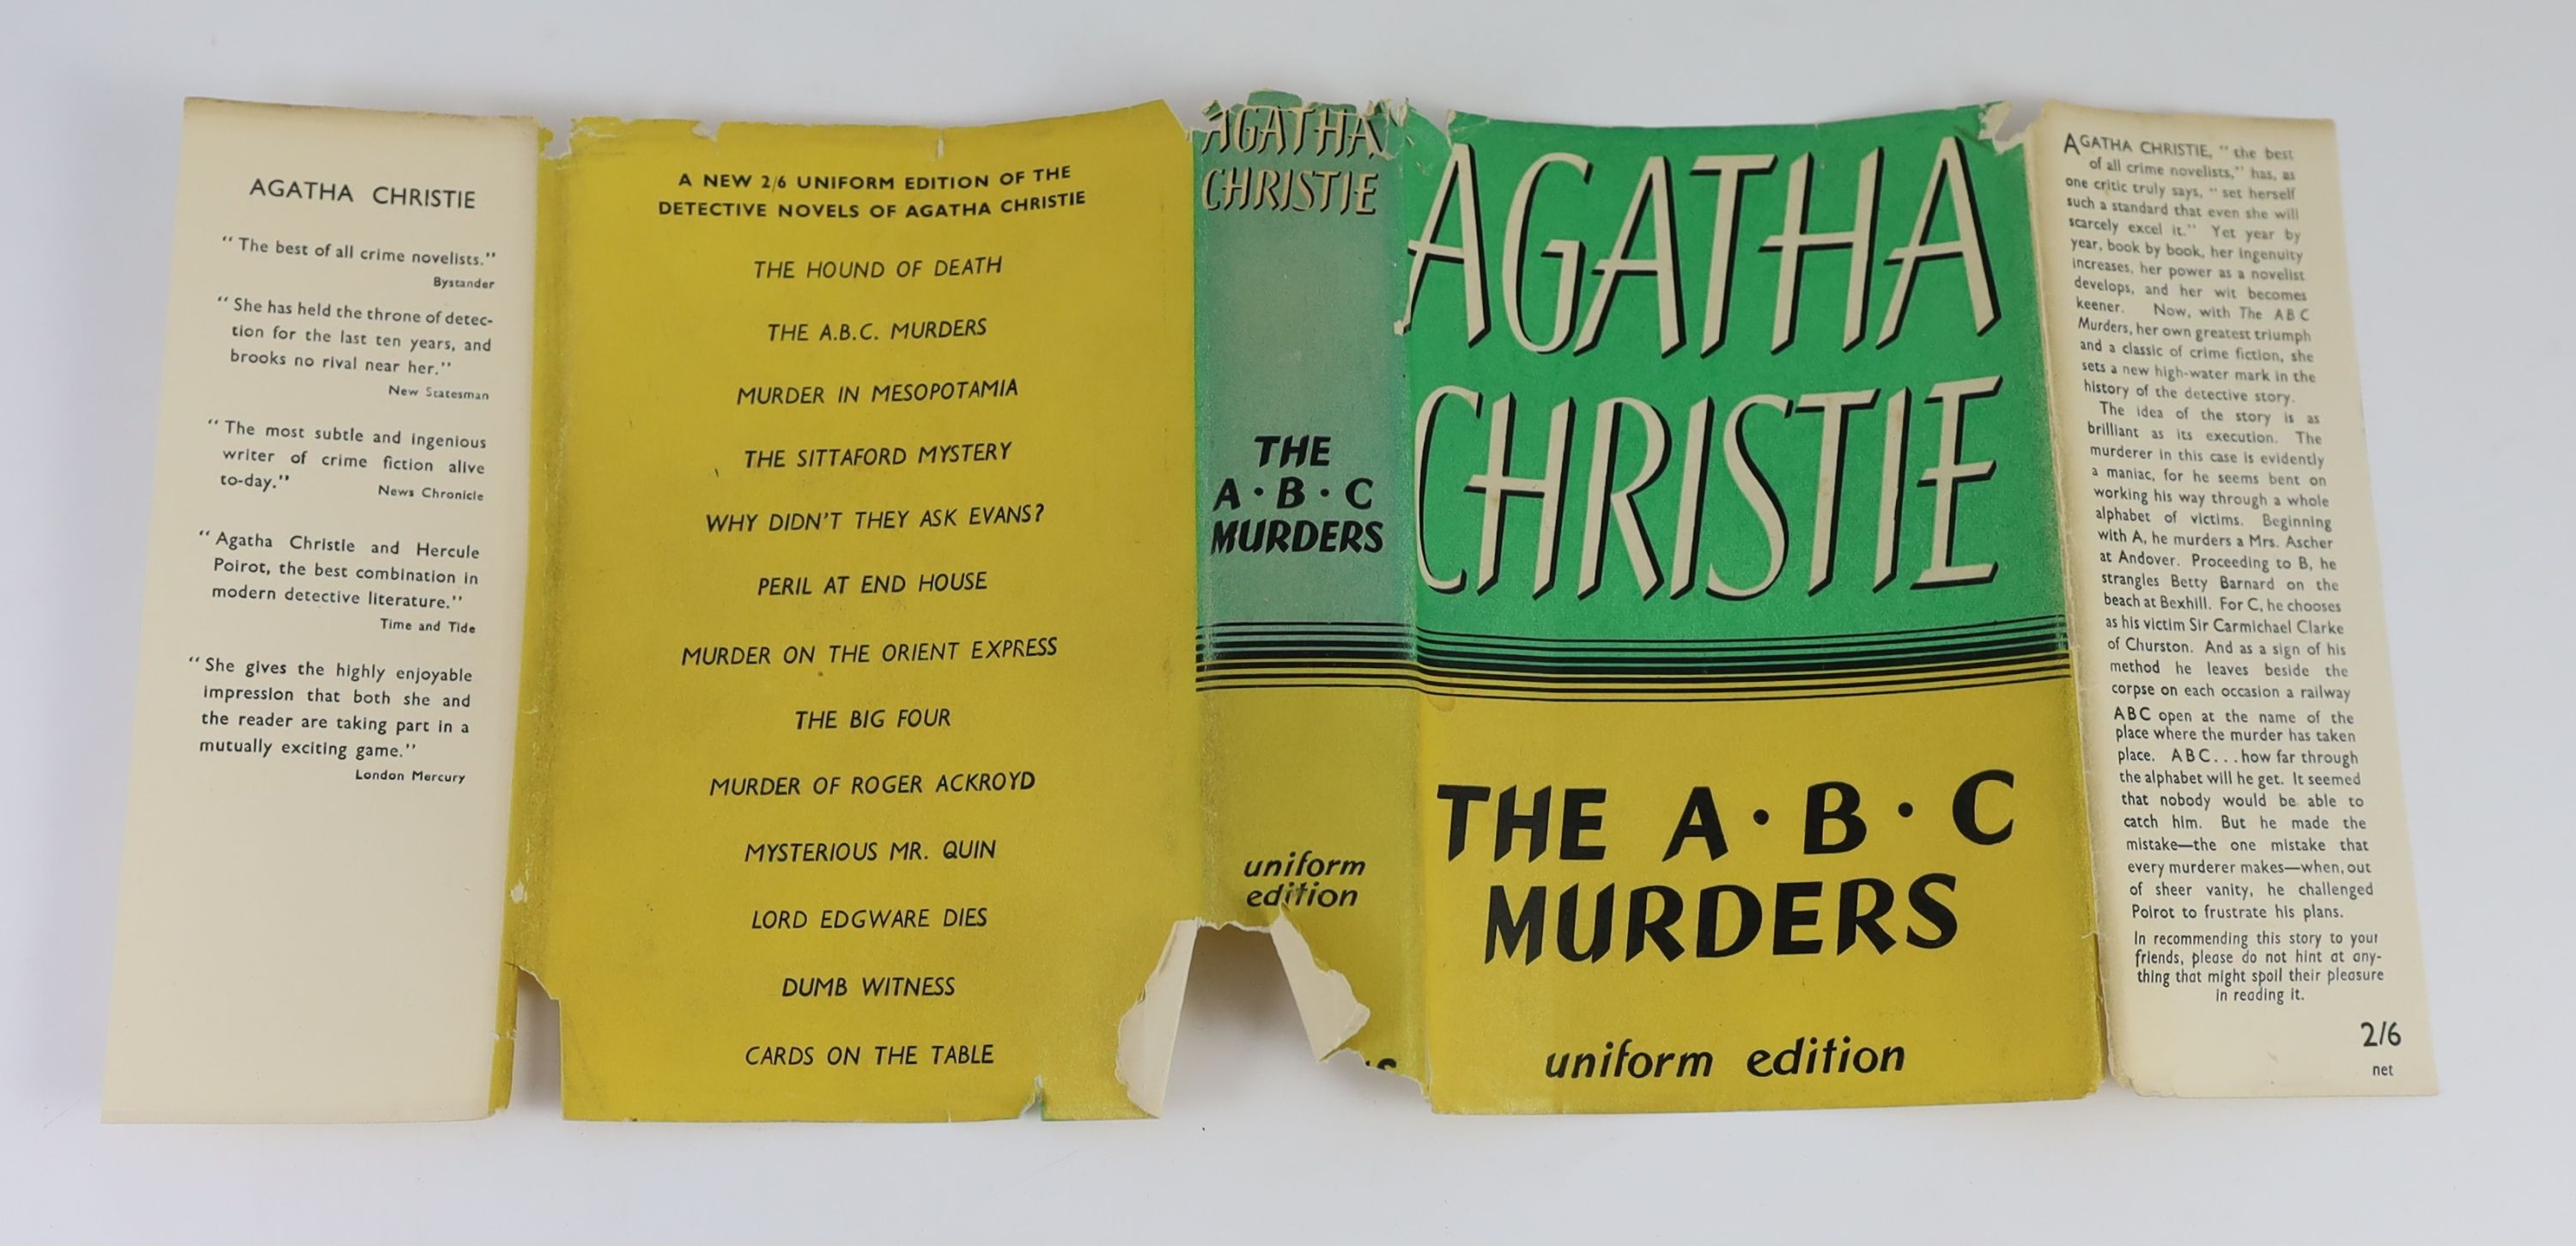 Christie, Agatha - 12 works - Partners in Crime, with torn d/j, with loss to spine and lower rear panel, nd, [1929], Death on the Nile, 2nd impression, in unclipped d/j, with loss to lower spine, 1938; Cards on the Table